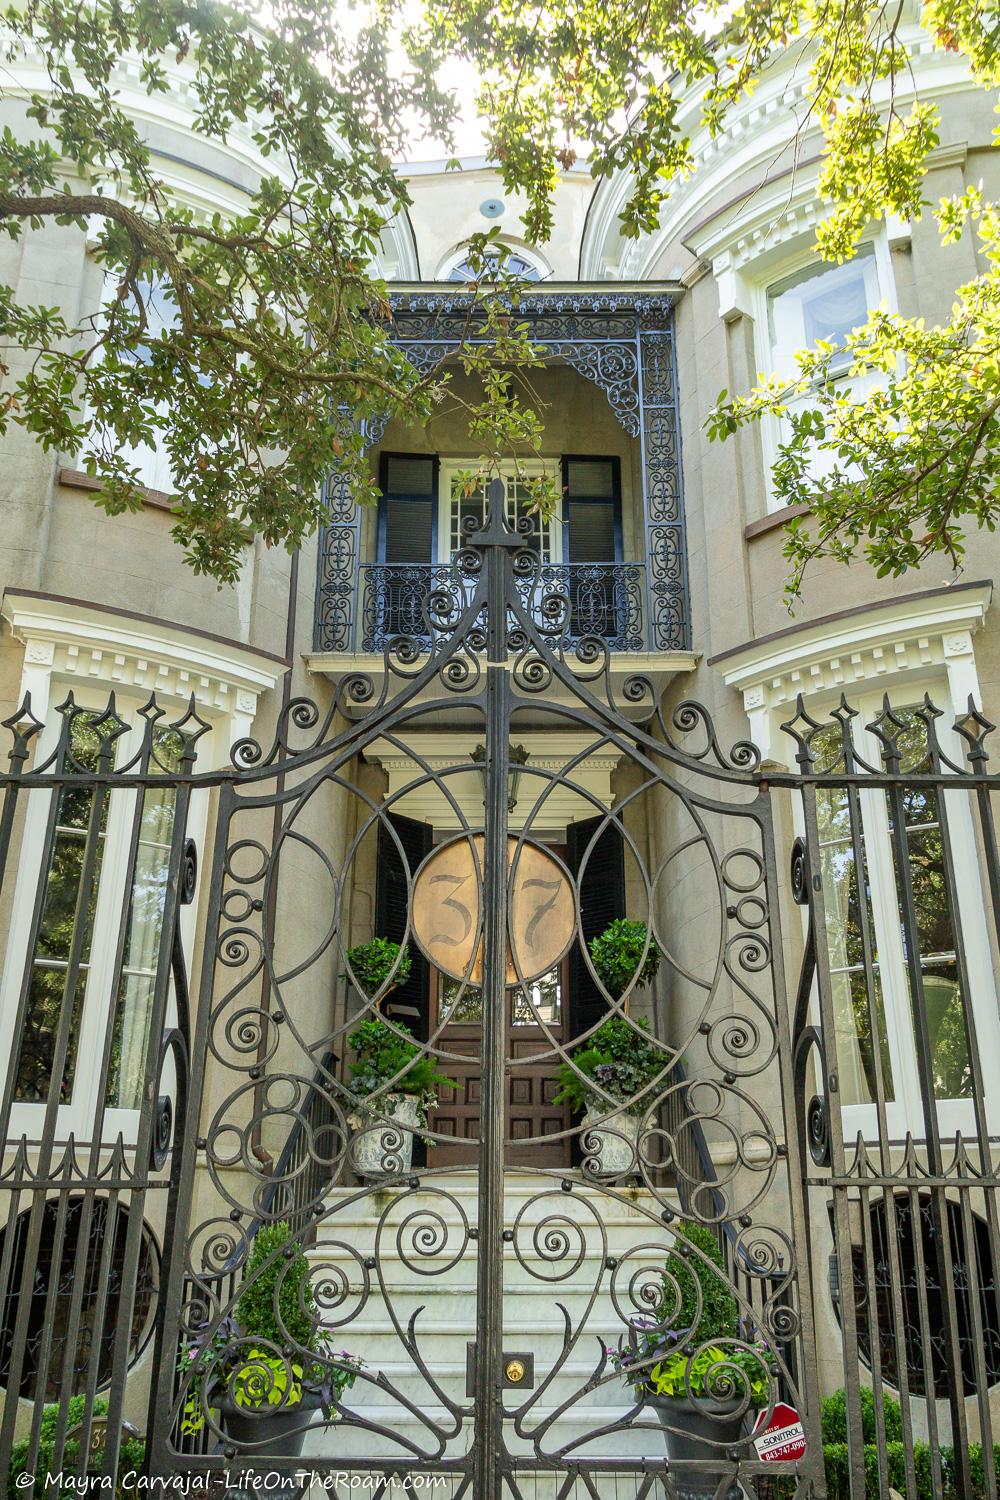 A historic house with an artistic iron gate